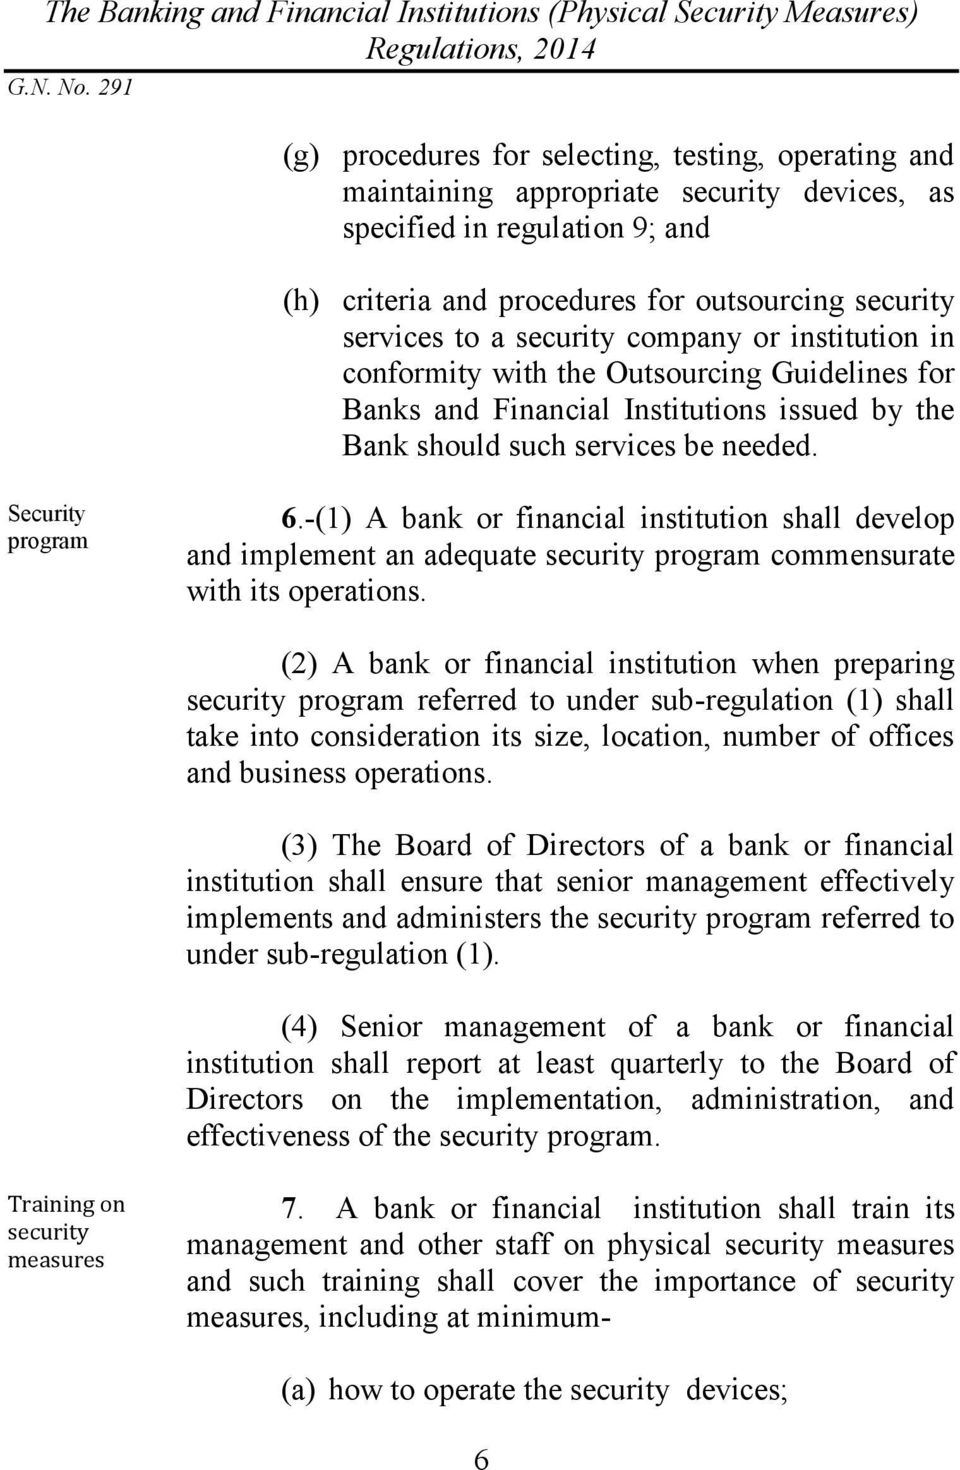 -(1) A bank or financial institution shall develop and implement an adequate security program commensurate with its operations.